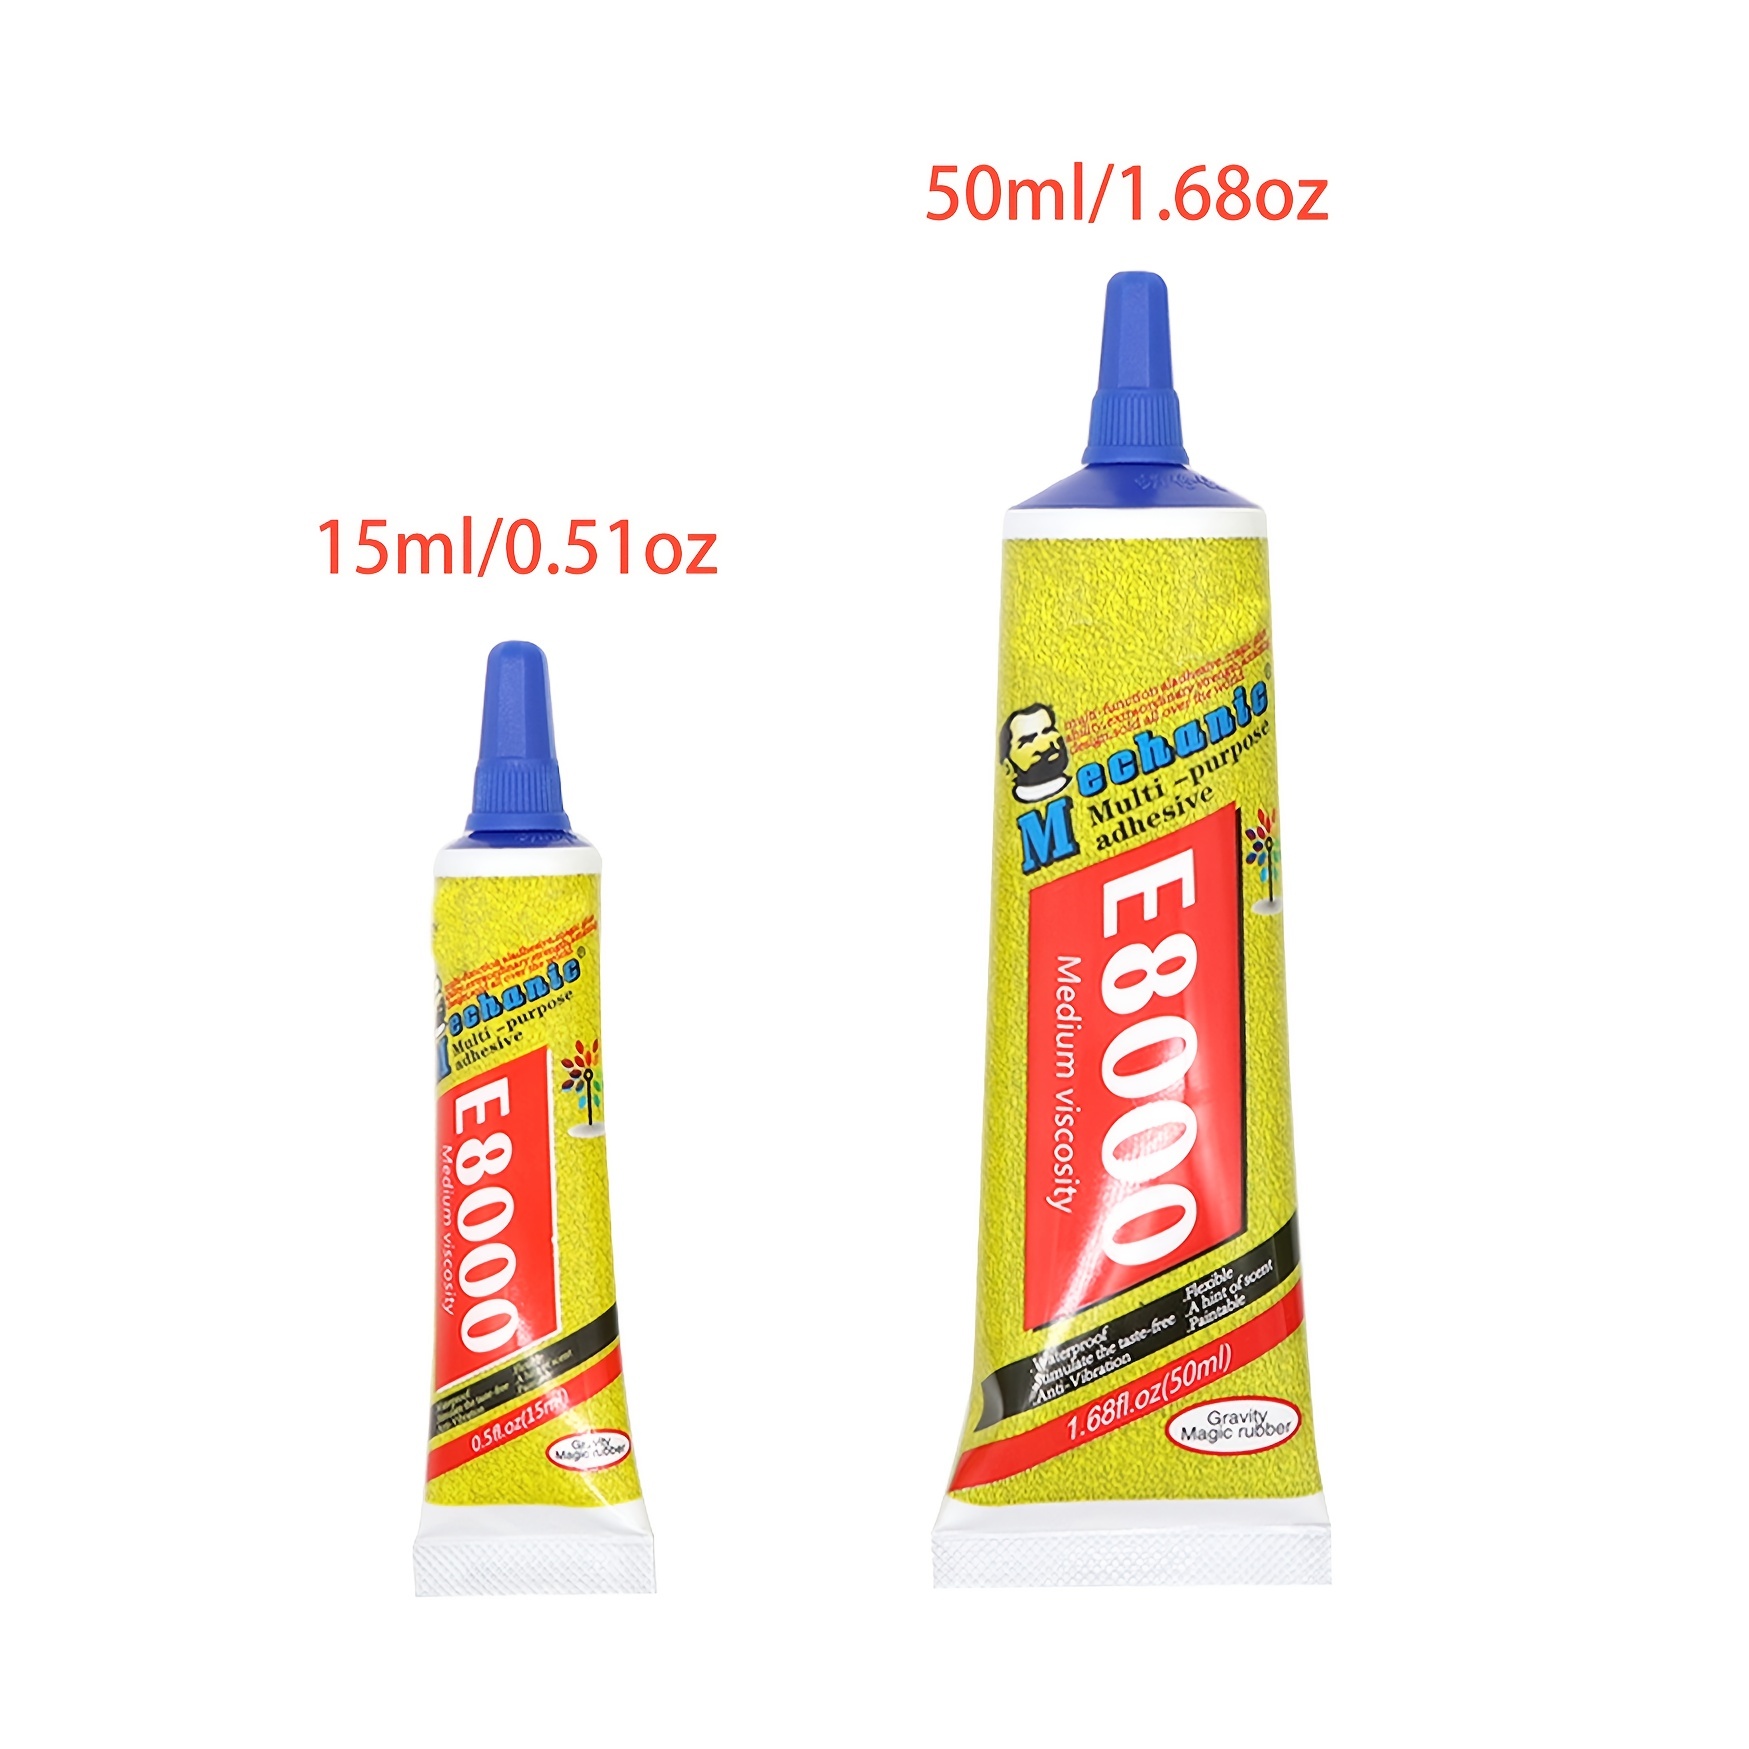 E8000 15ml/50ml Adhesive Glue To Stick The Screen On The Phone ,Tools this  not shipped alone unless you order it with screen - AliExpress